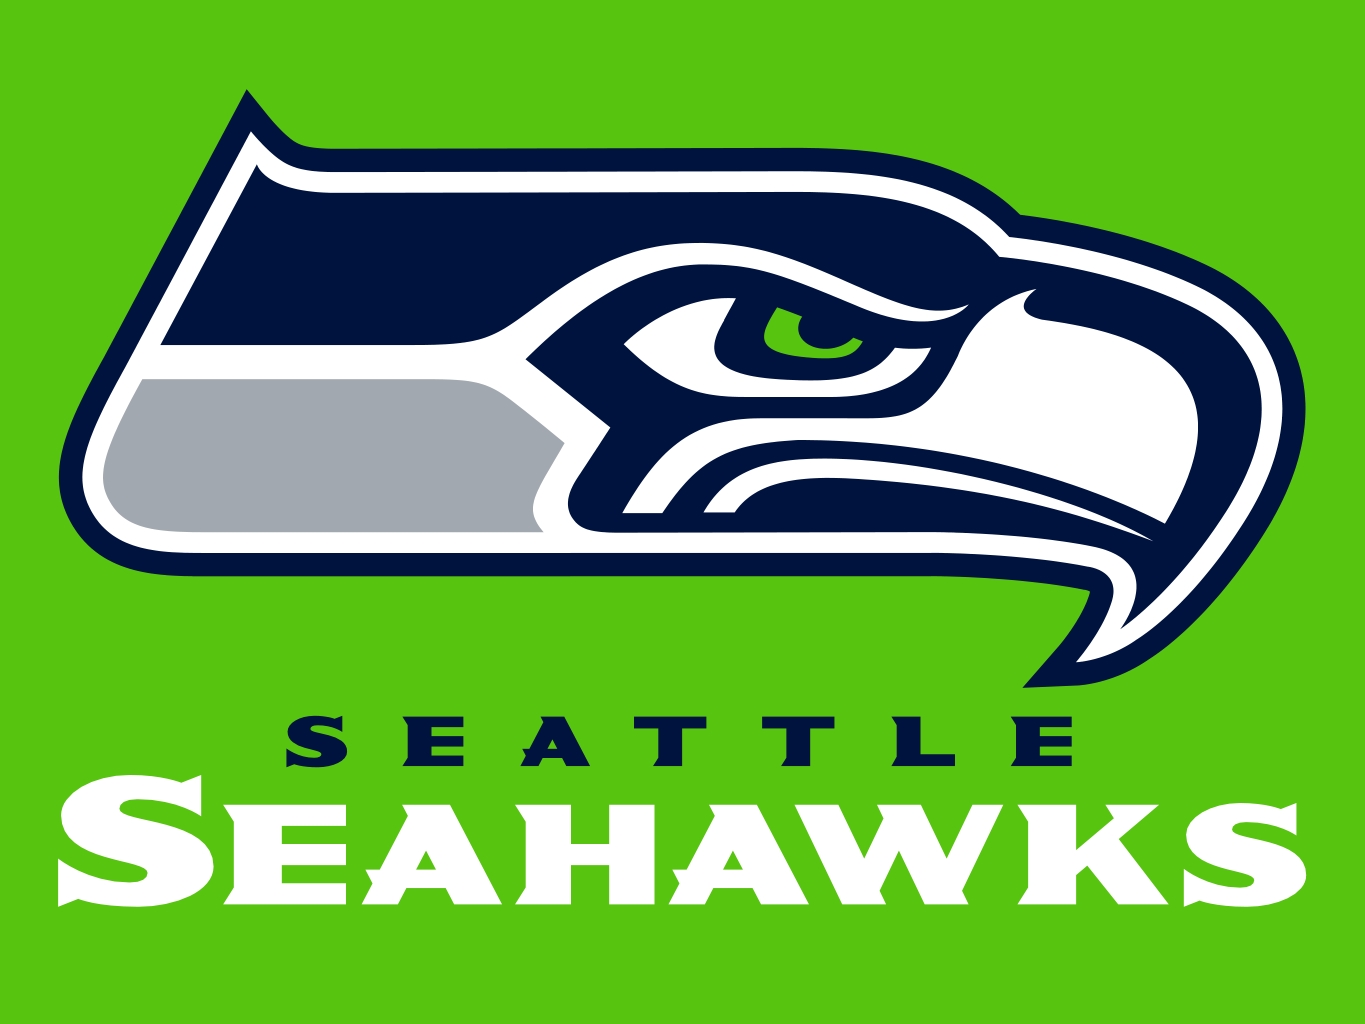  seattle seahawks home nfl apparel style hd wallpaper Car Pictures